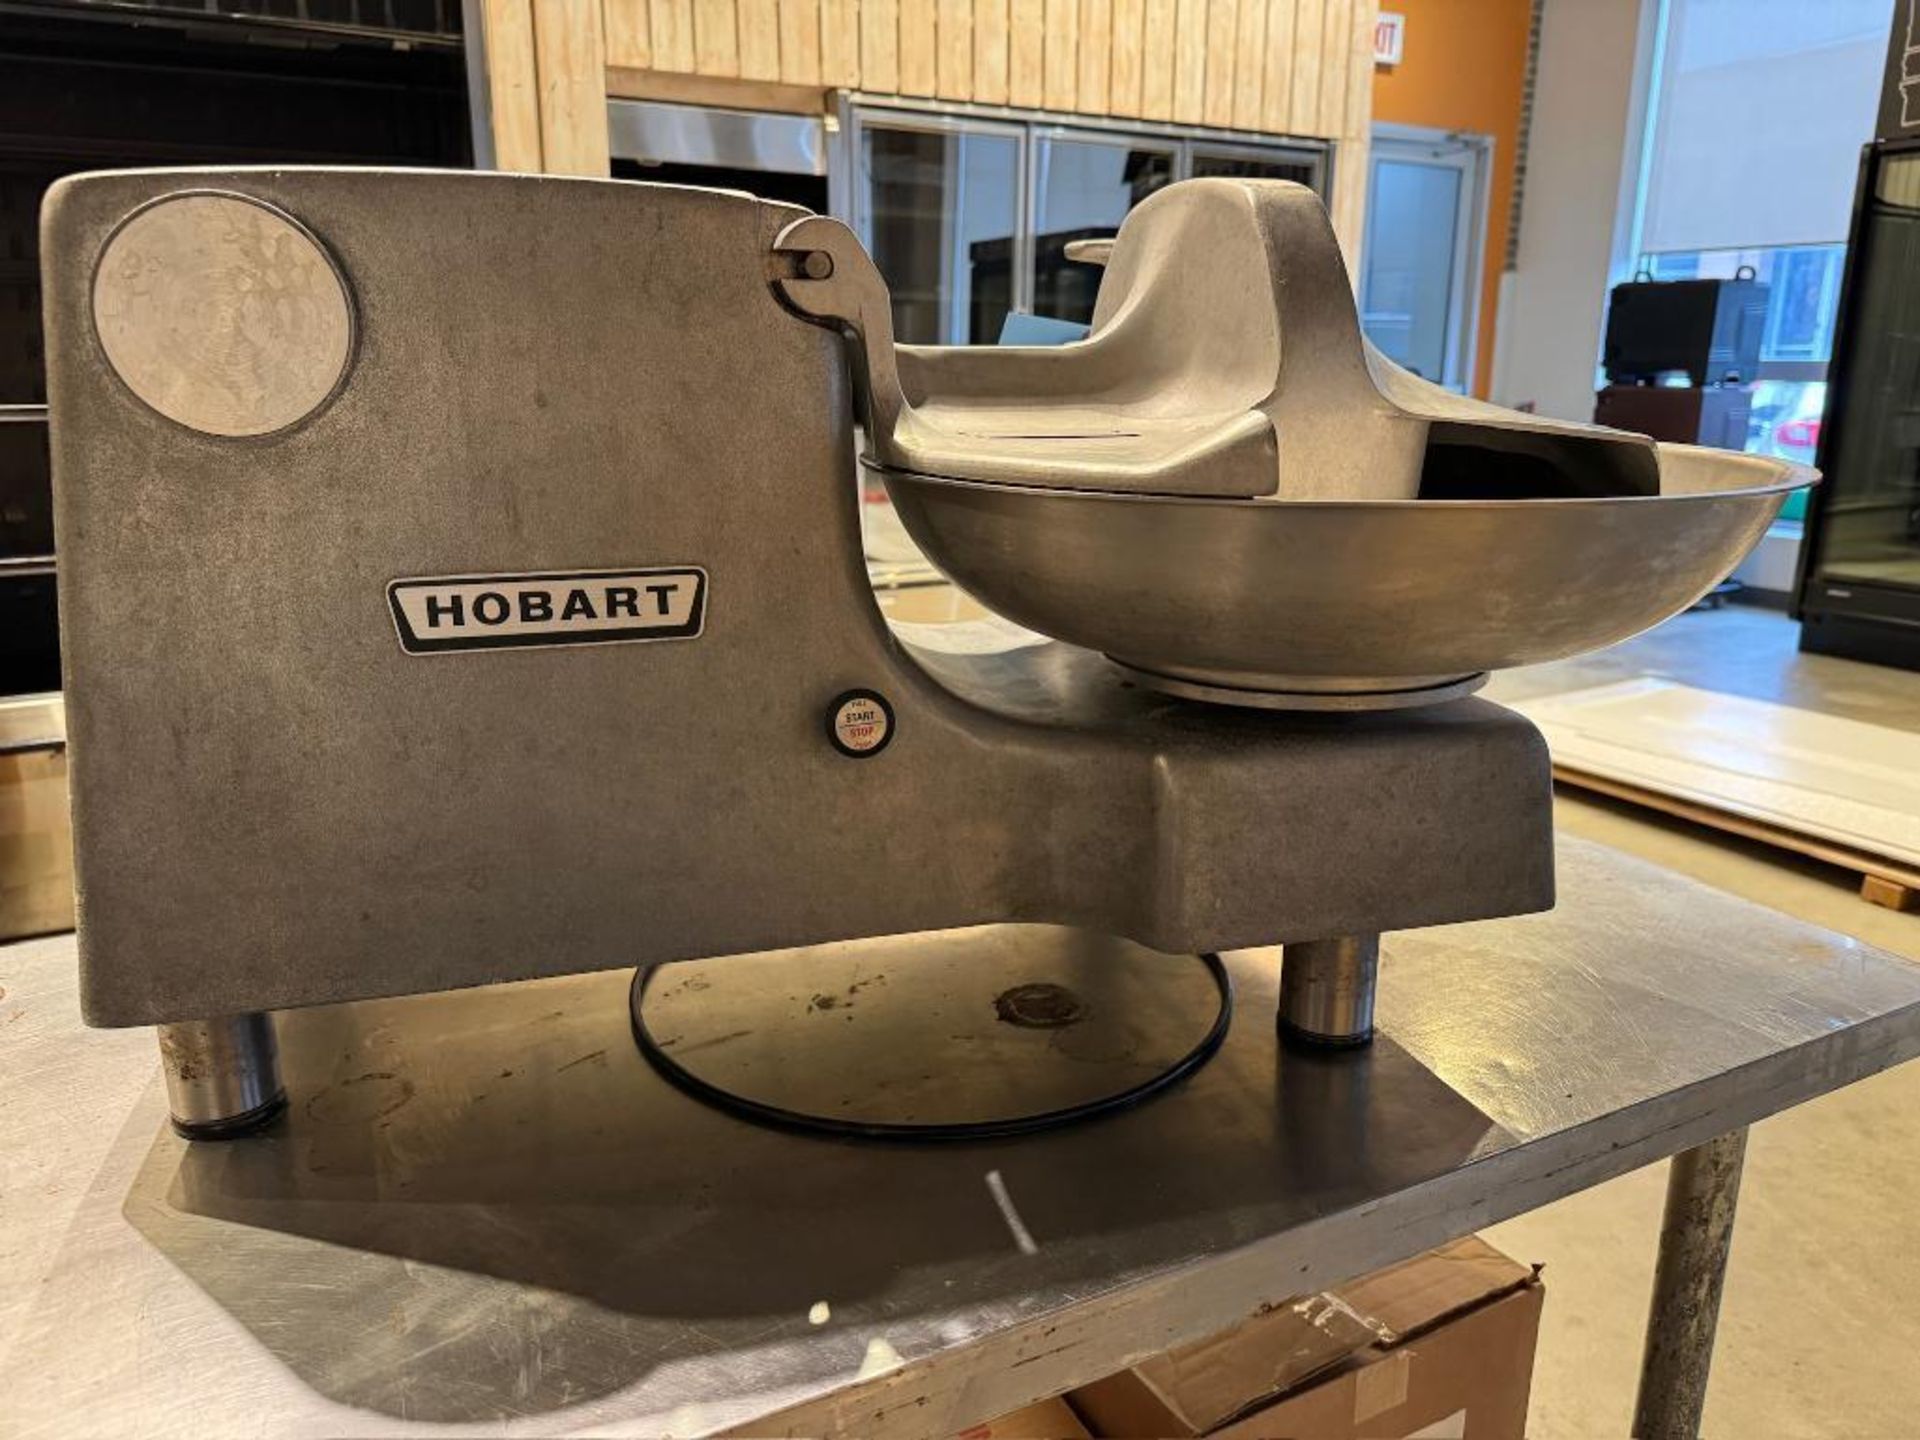 Hobart Tabletop Food Cutter/Bowl Chopper Model 84186, S/N 561-113-662, 1 HP, 115 Volts, with SS Meta - Image 2 of 6